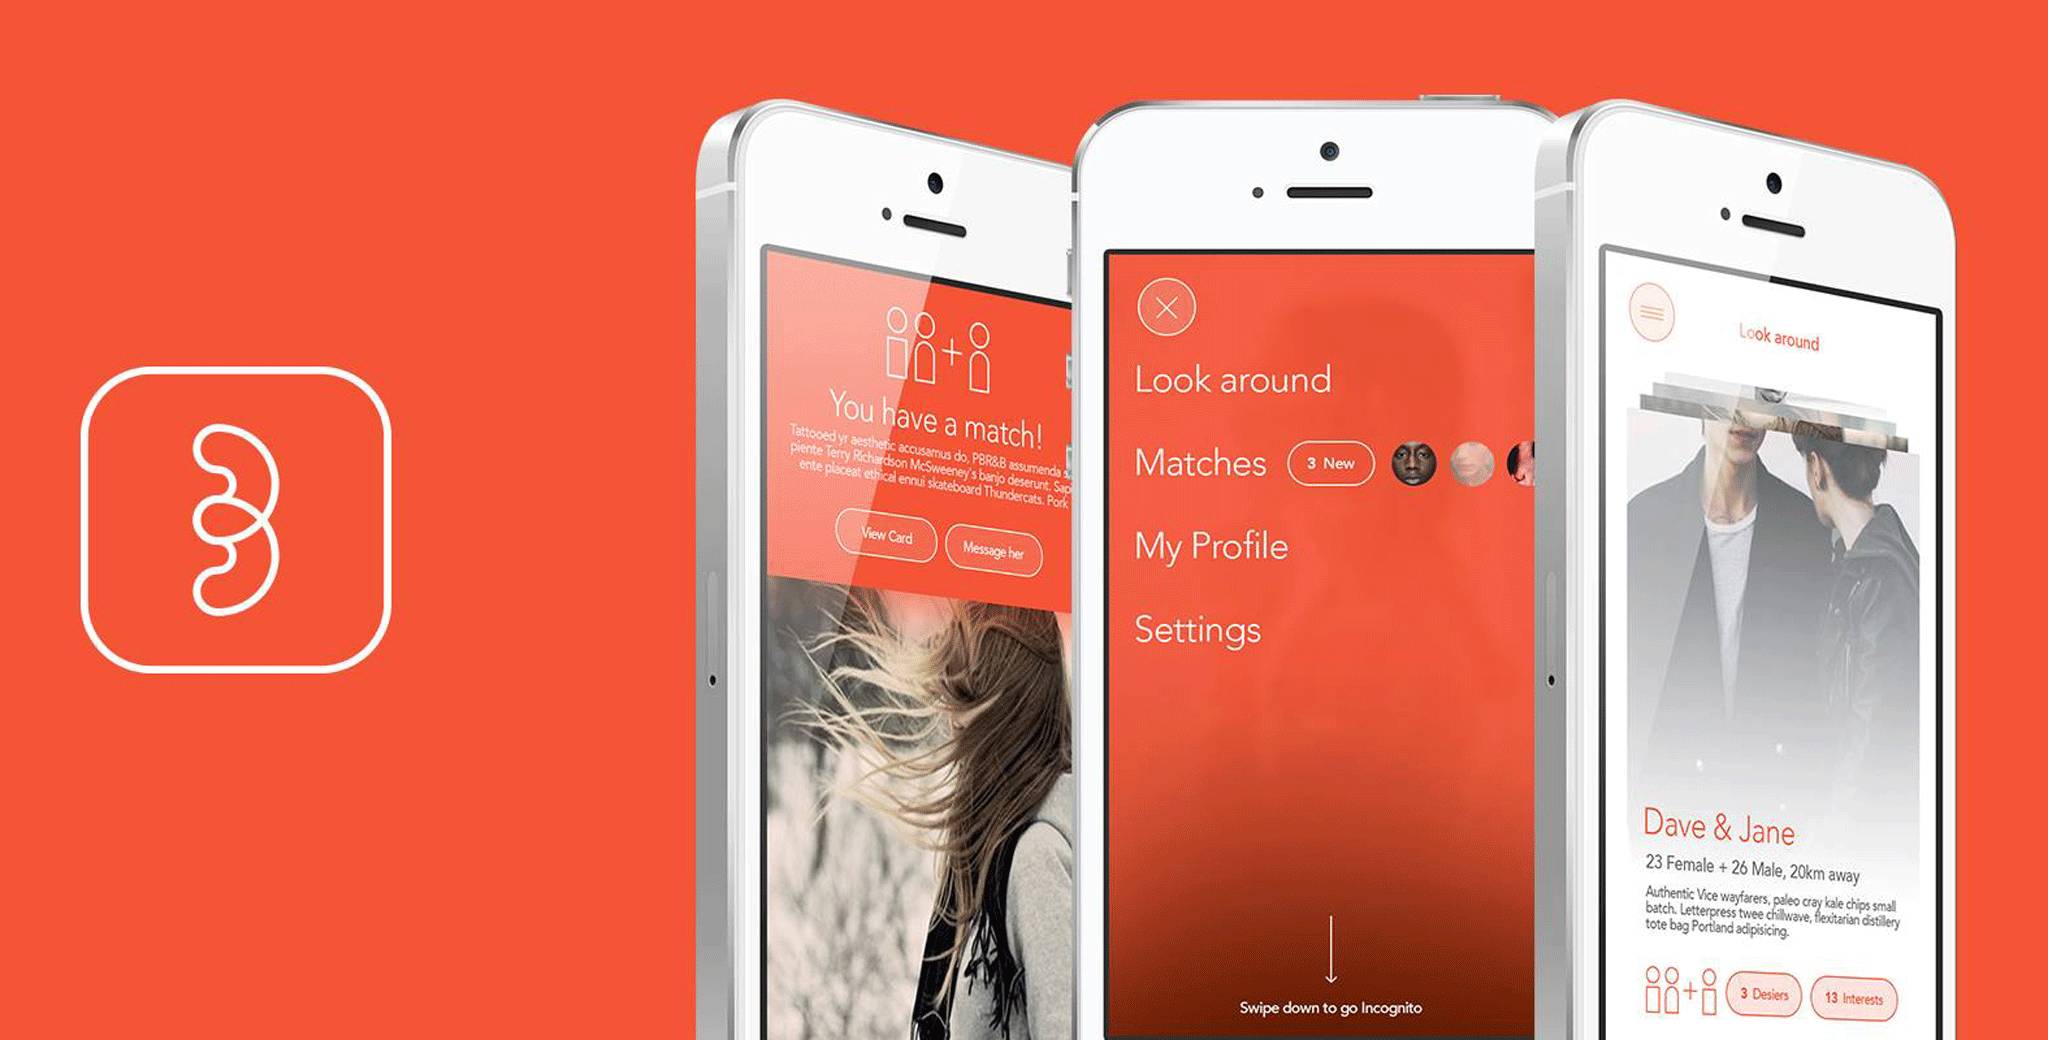 3nder encourages users to 'swipe up for love'